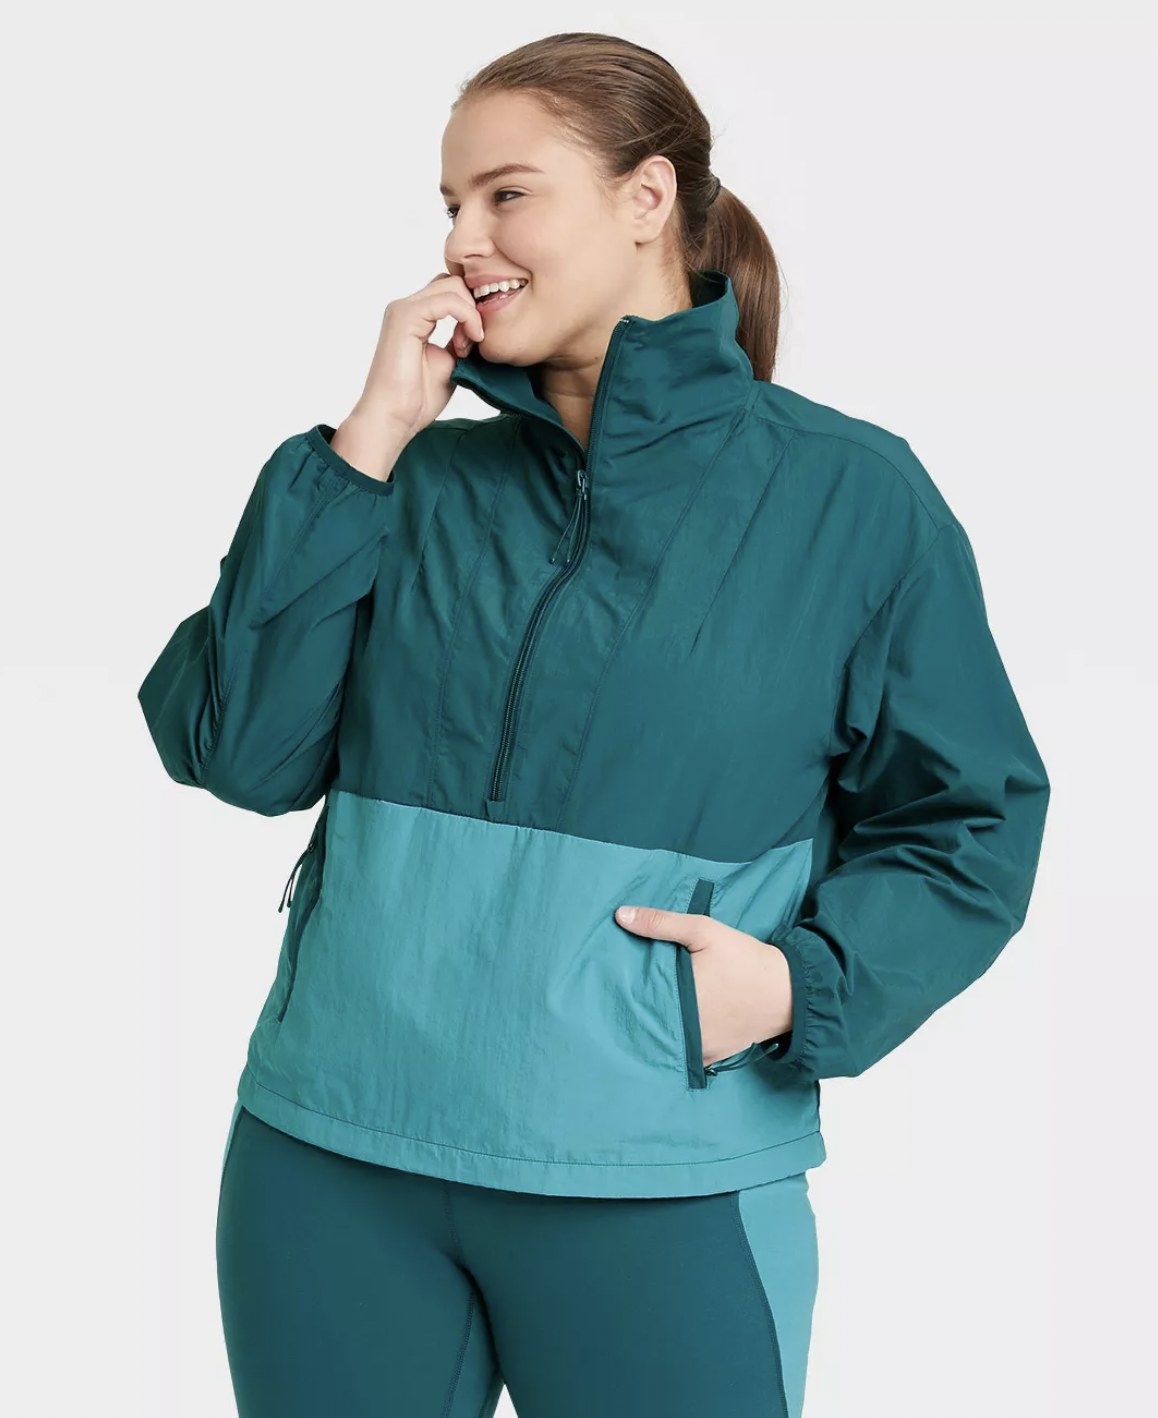 model wearing the windbreaker in teal and turquoise